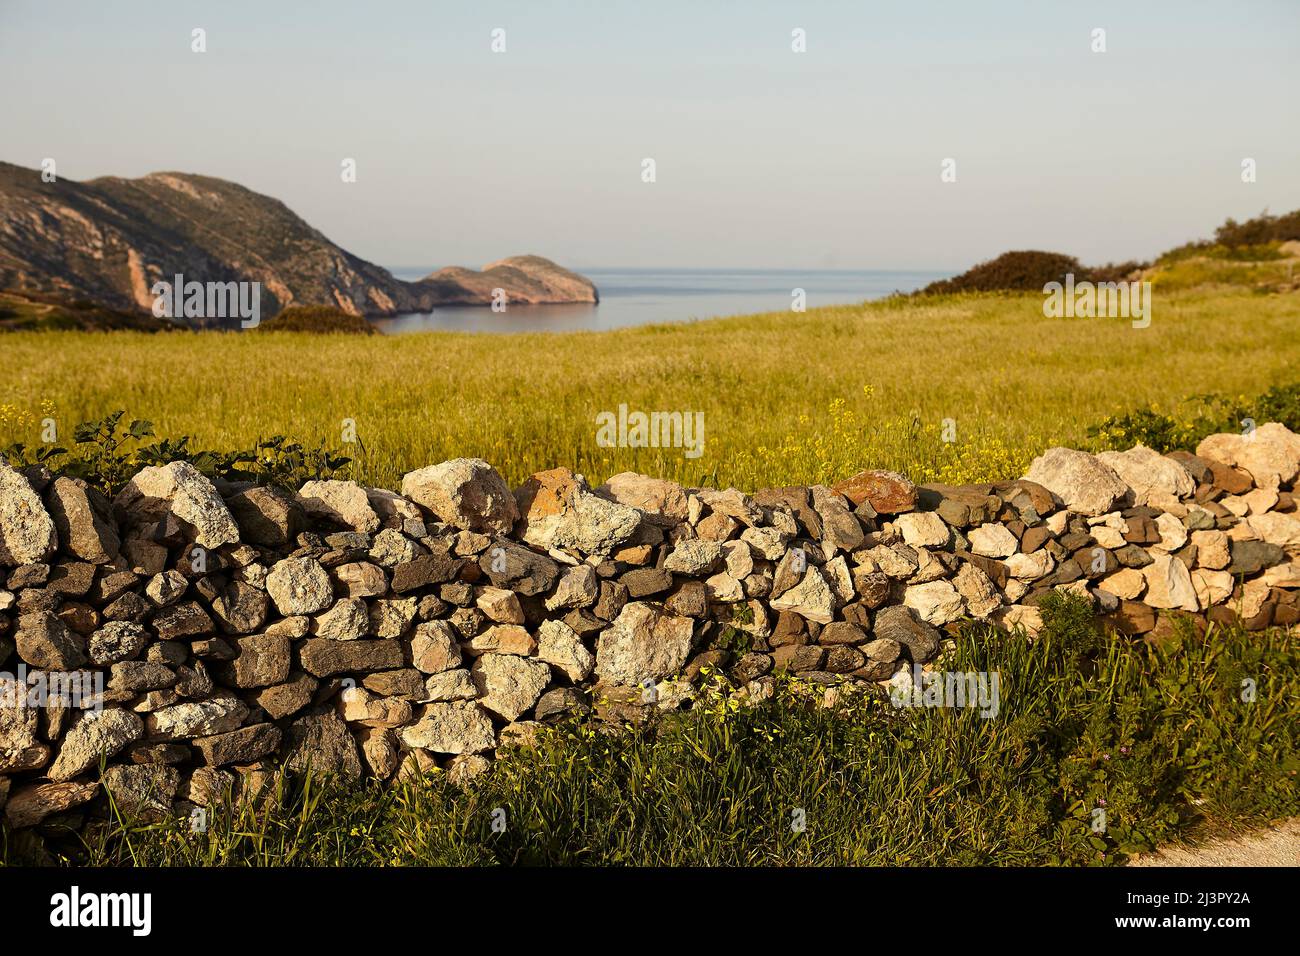 Syros, field with flowers and Aegean Sea Stock Photo